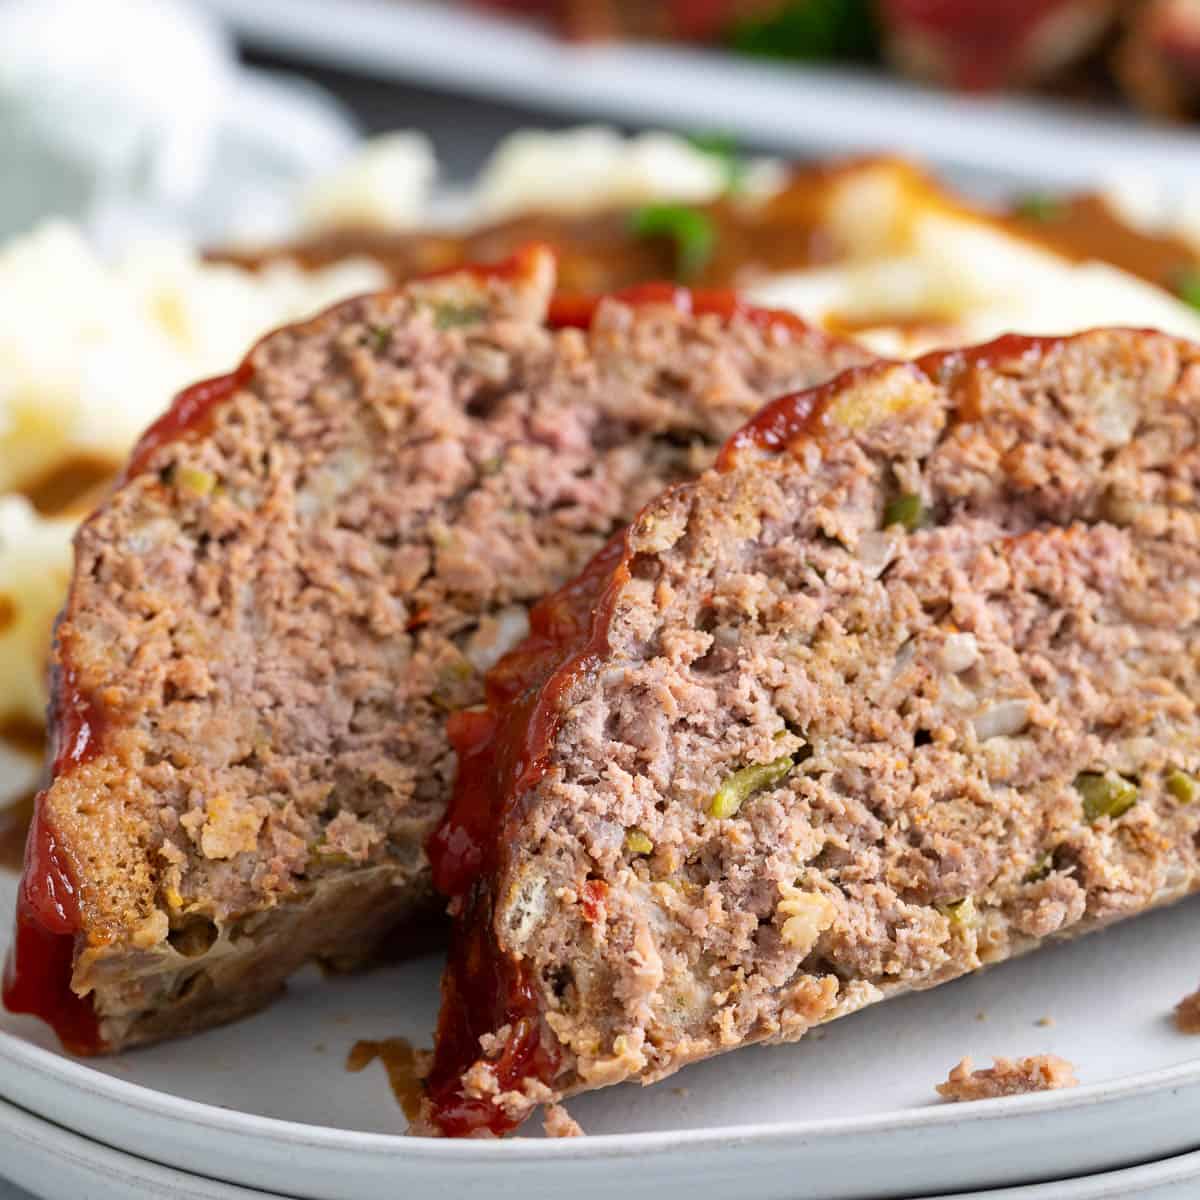 Stove top stuffing meatloaf